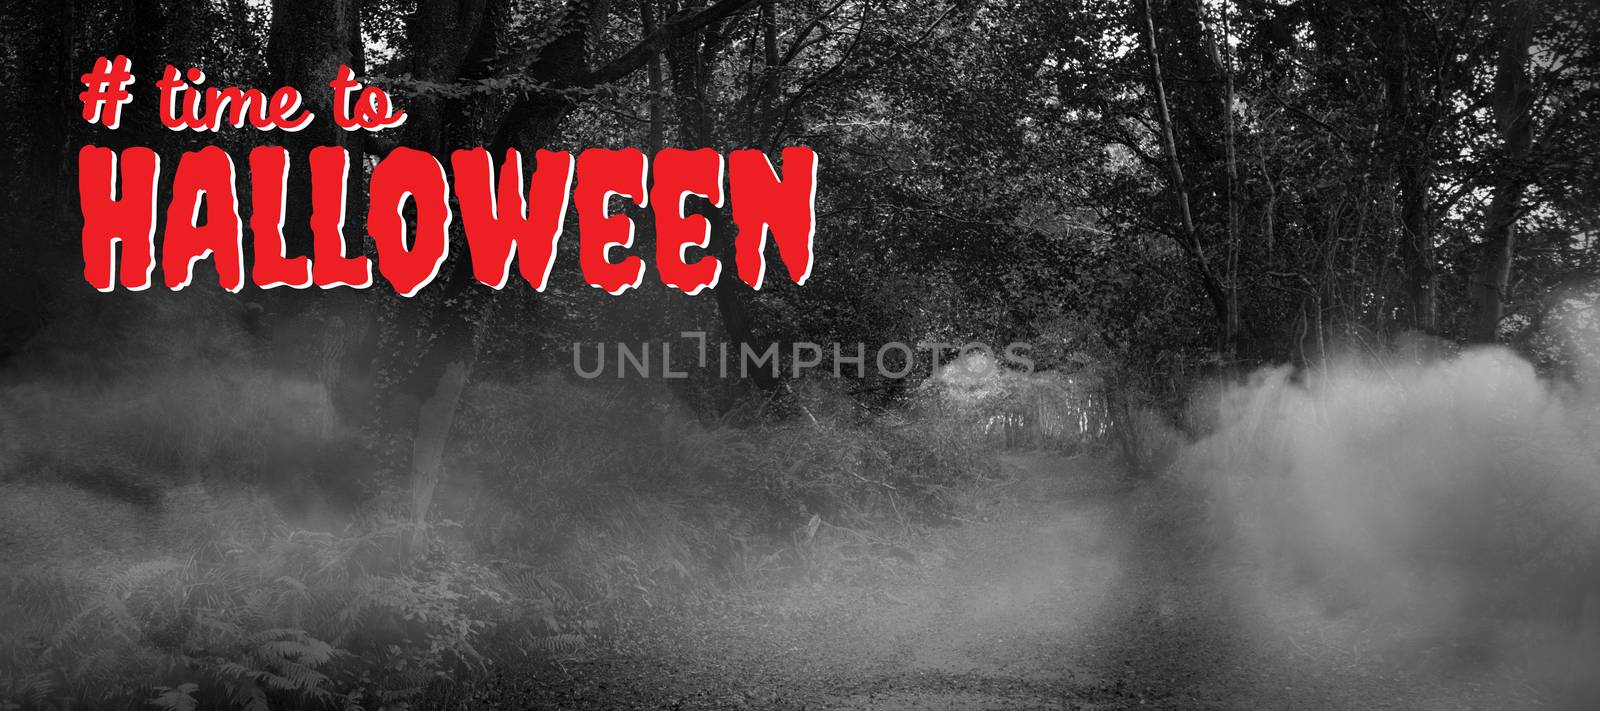 Digital composite image of time to Halloween text against way between trees